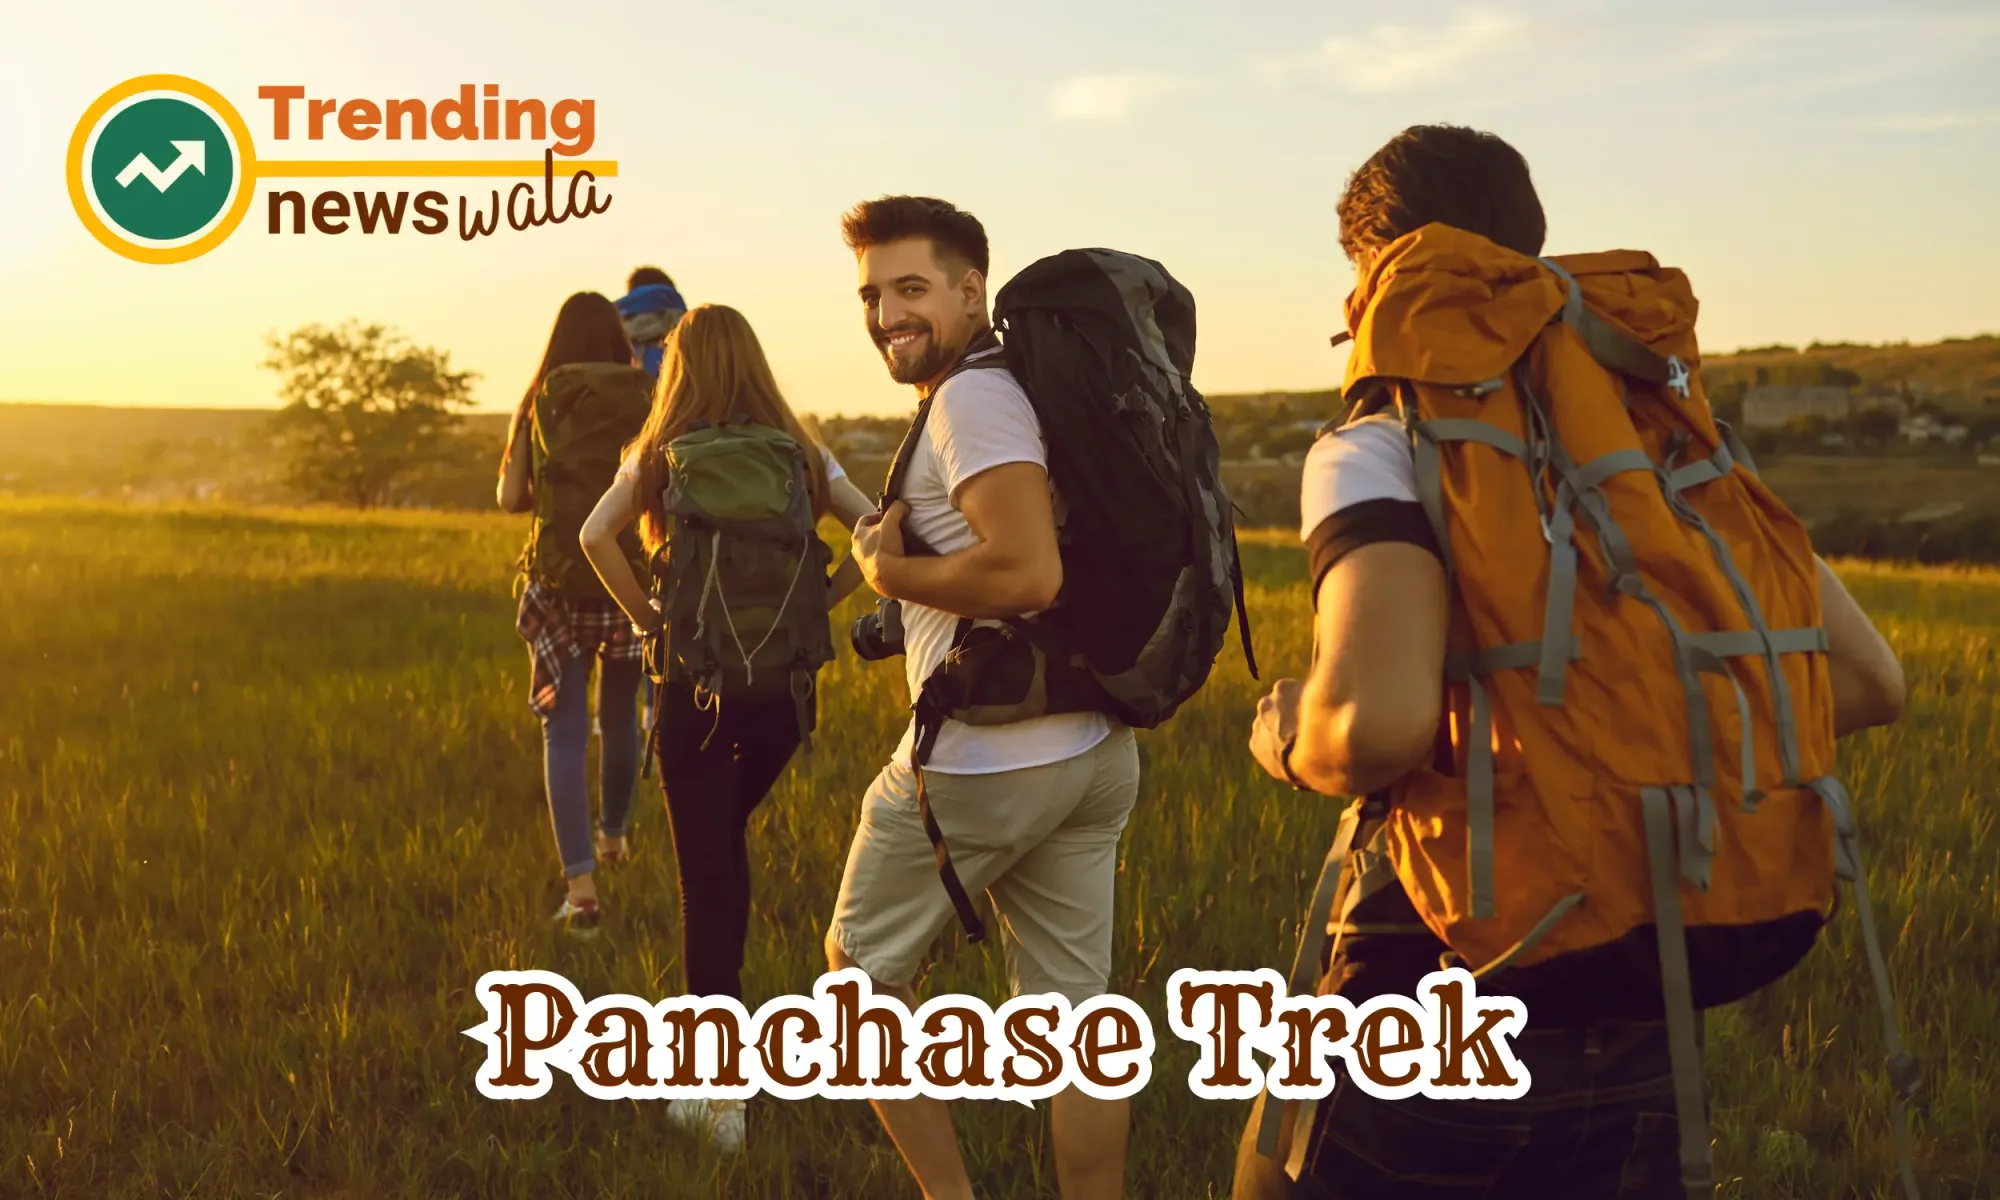 The Panchase Trek is a lesser-known trekking route in the Annapurna region of Nepal